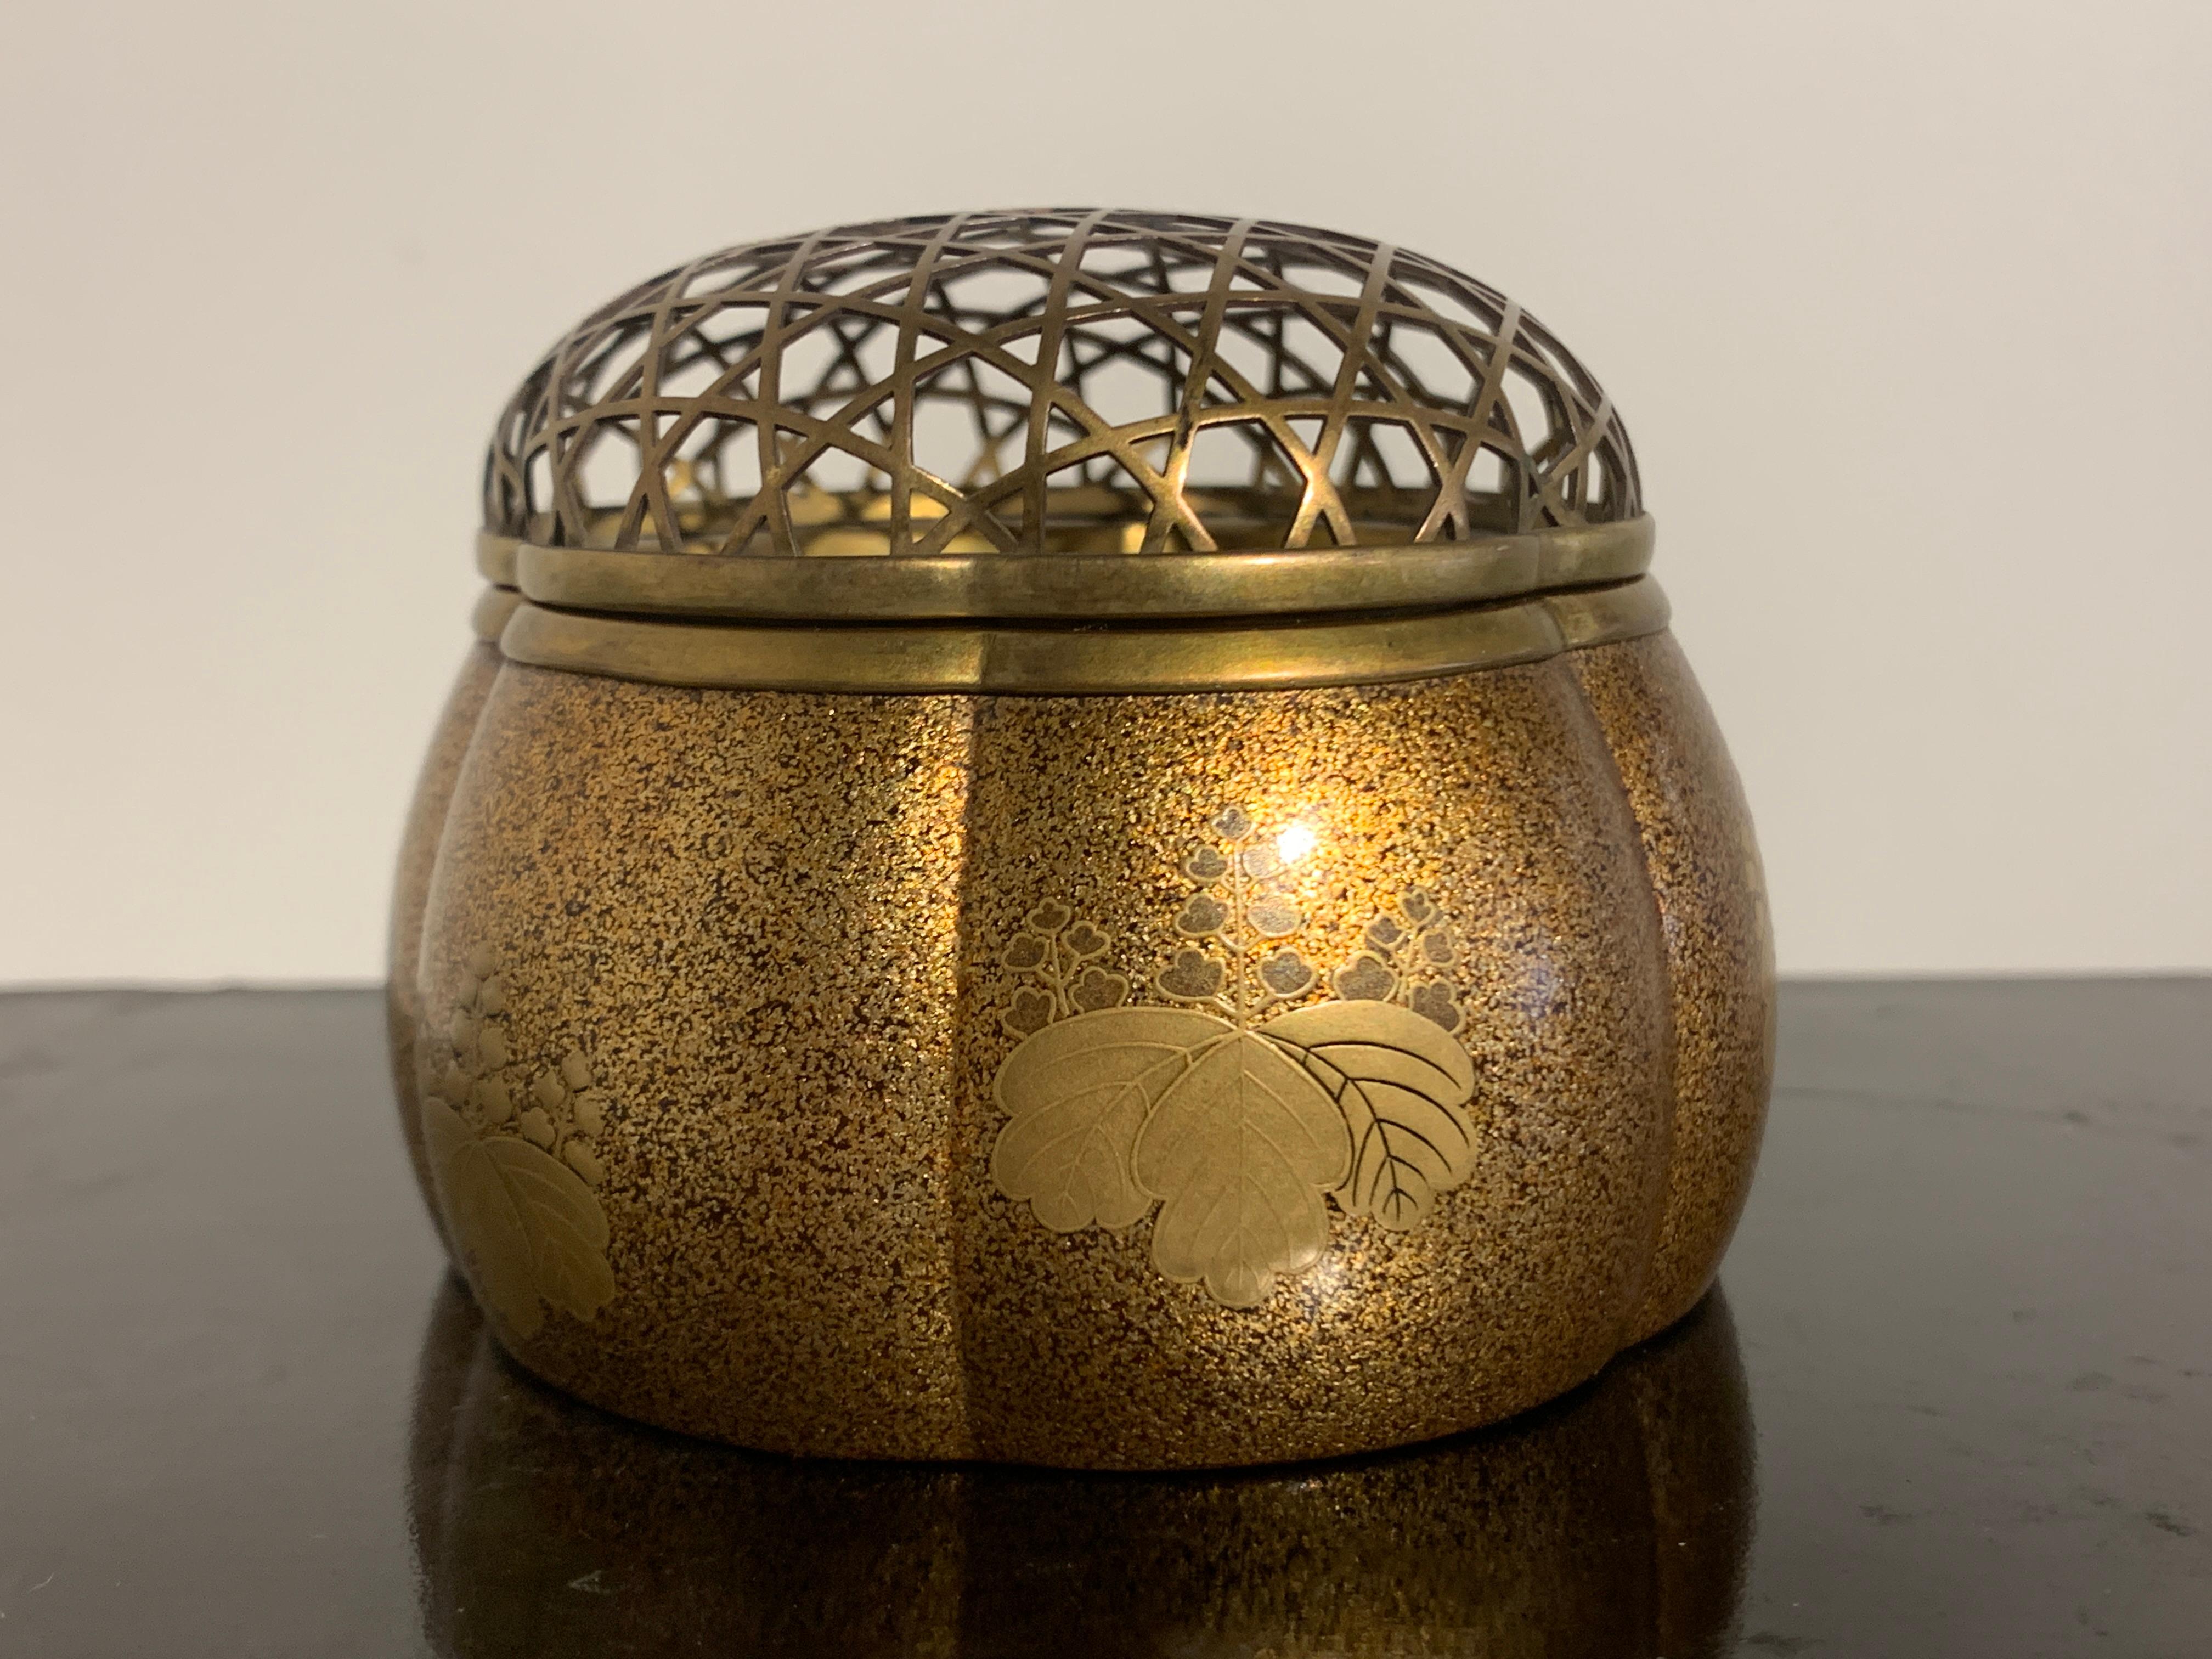 An exceptionally fine Japanese melon form lacquer incense burner, Akoya koro, featuring the Toyotomi Mon (family crest), Edo Period, 18th century, Japan.

The fine censer of lobed, melon form, called an Akoya koro. The koro, or incense burner, is